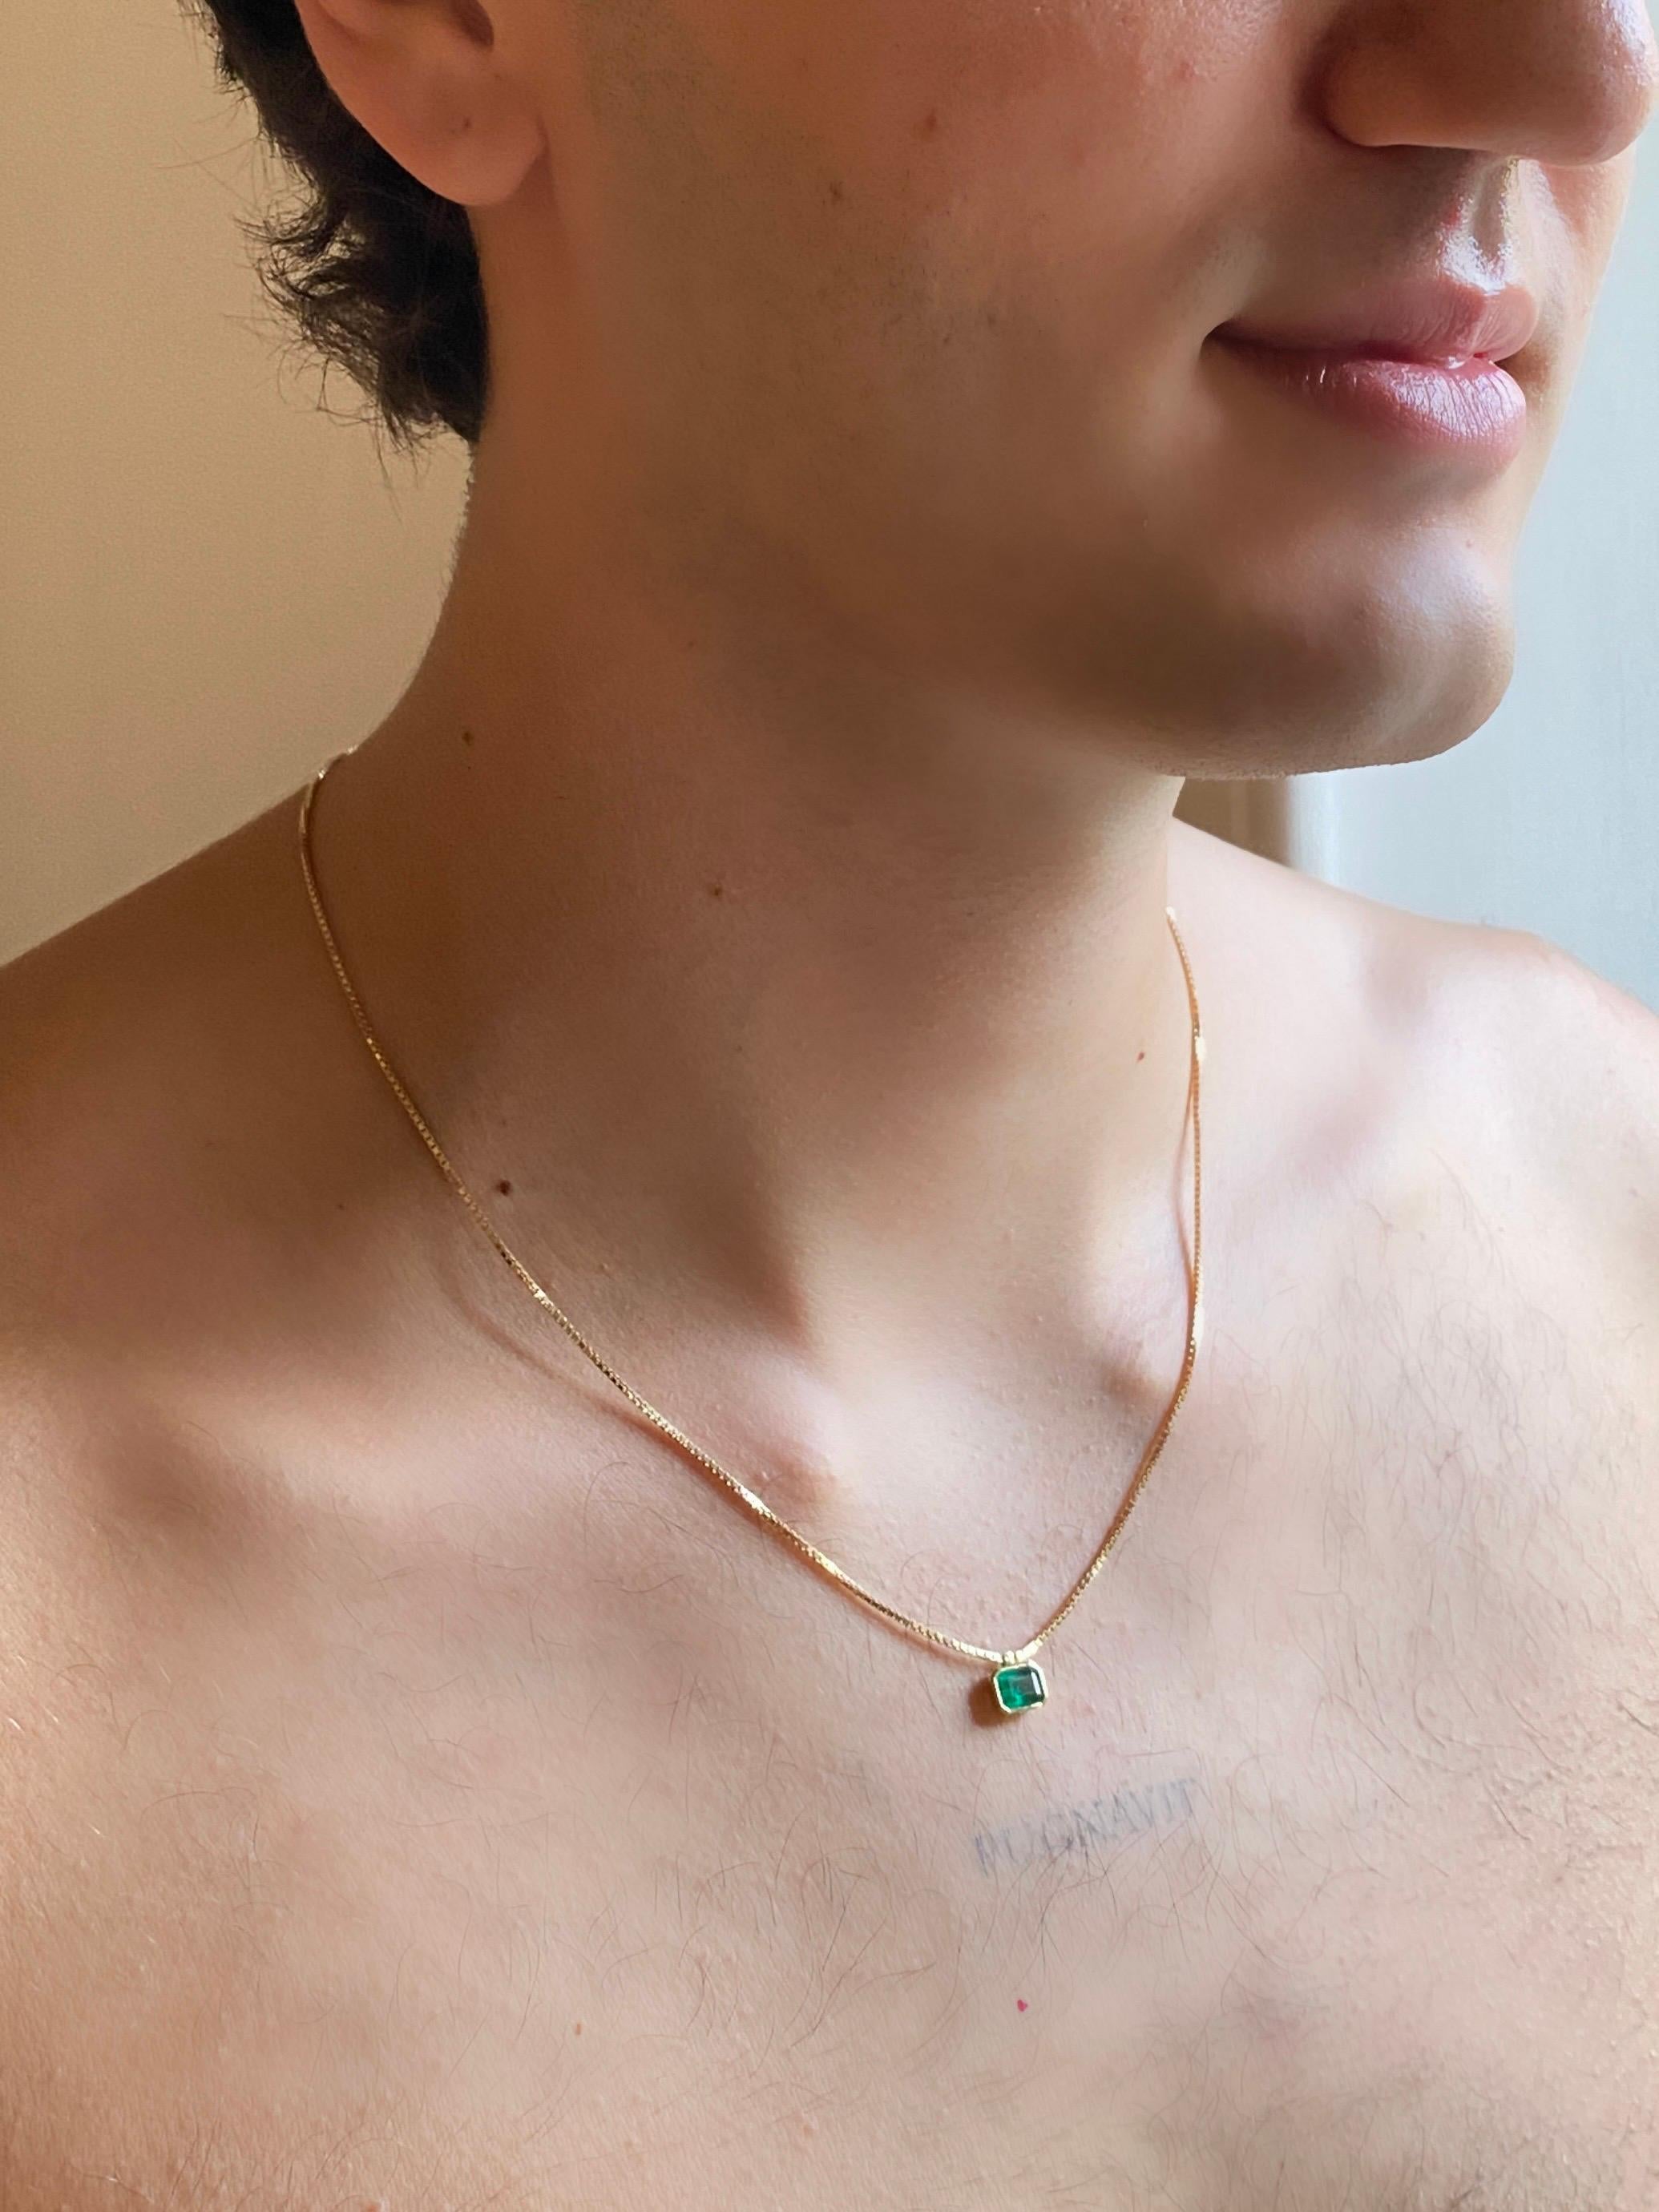 Rossella Ugolini Modern Emerald Man Necklace Crafted in Italy 18K Yellow Gold For Sale 5